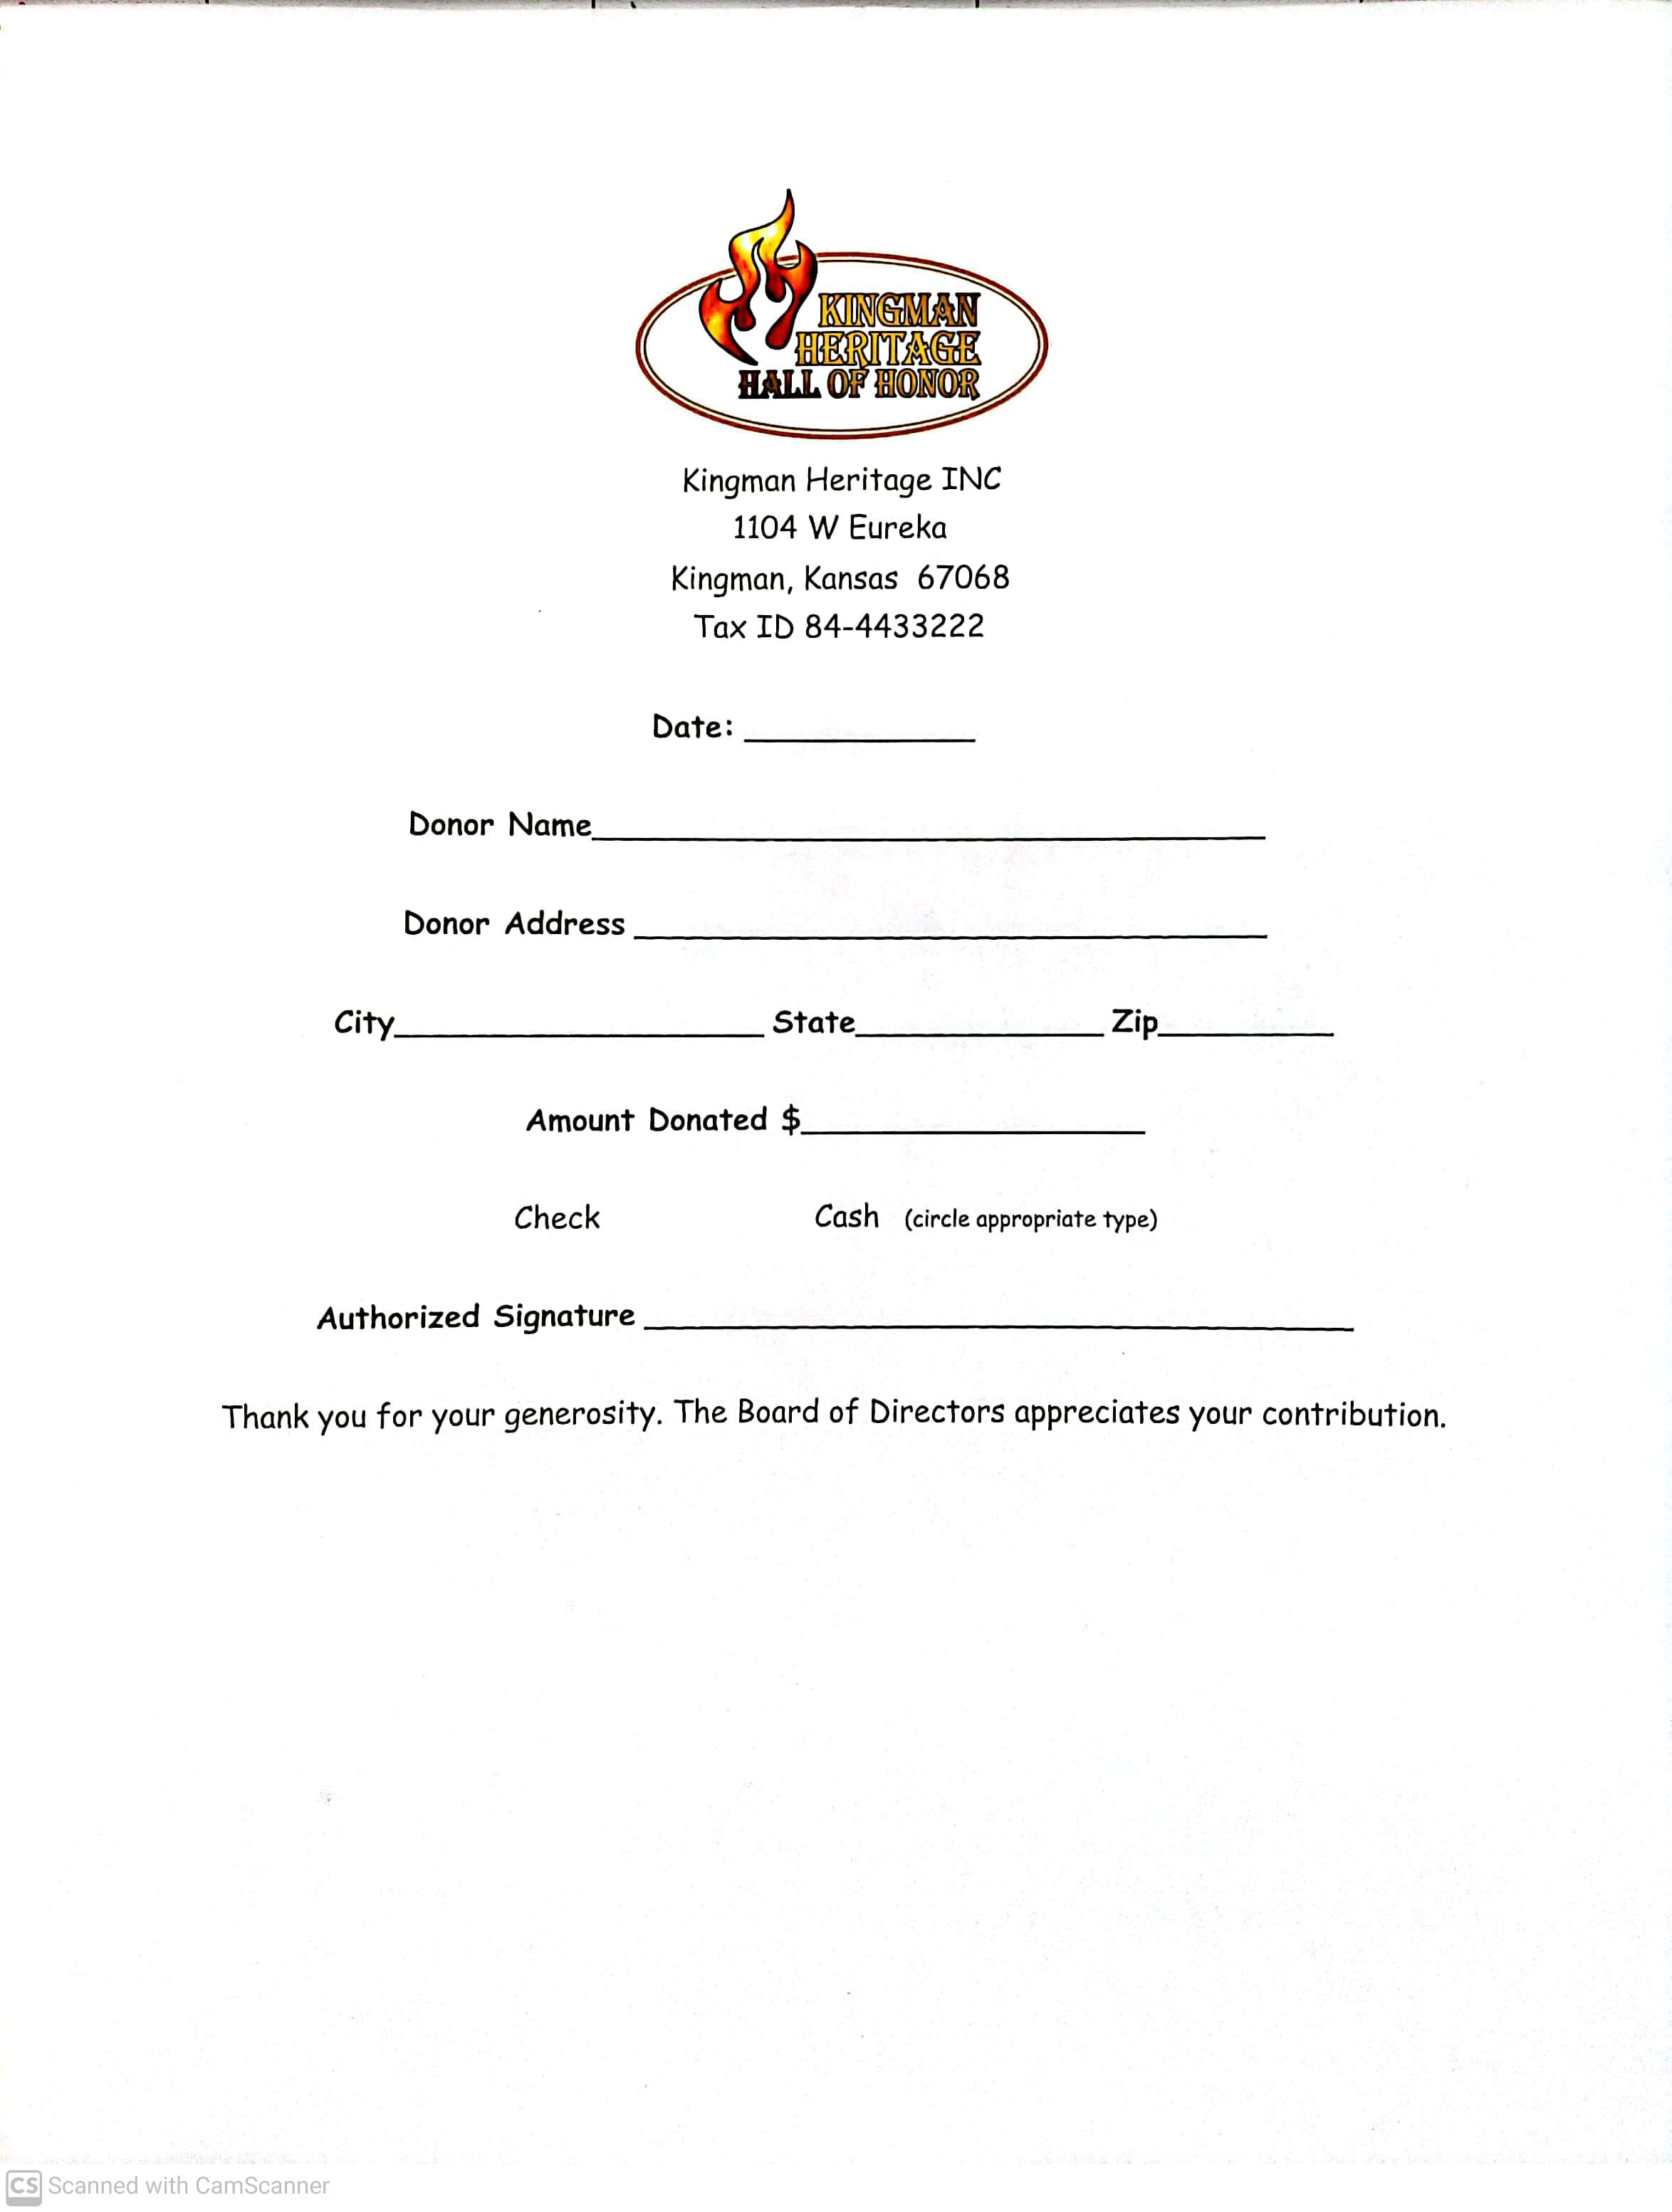 A Donation Form for the Kingman Heritage Hall